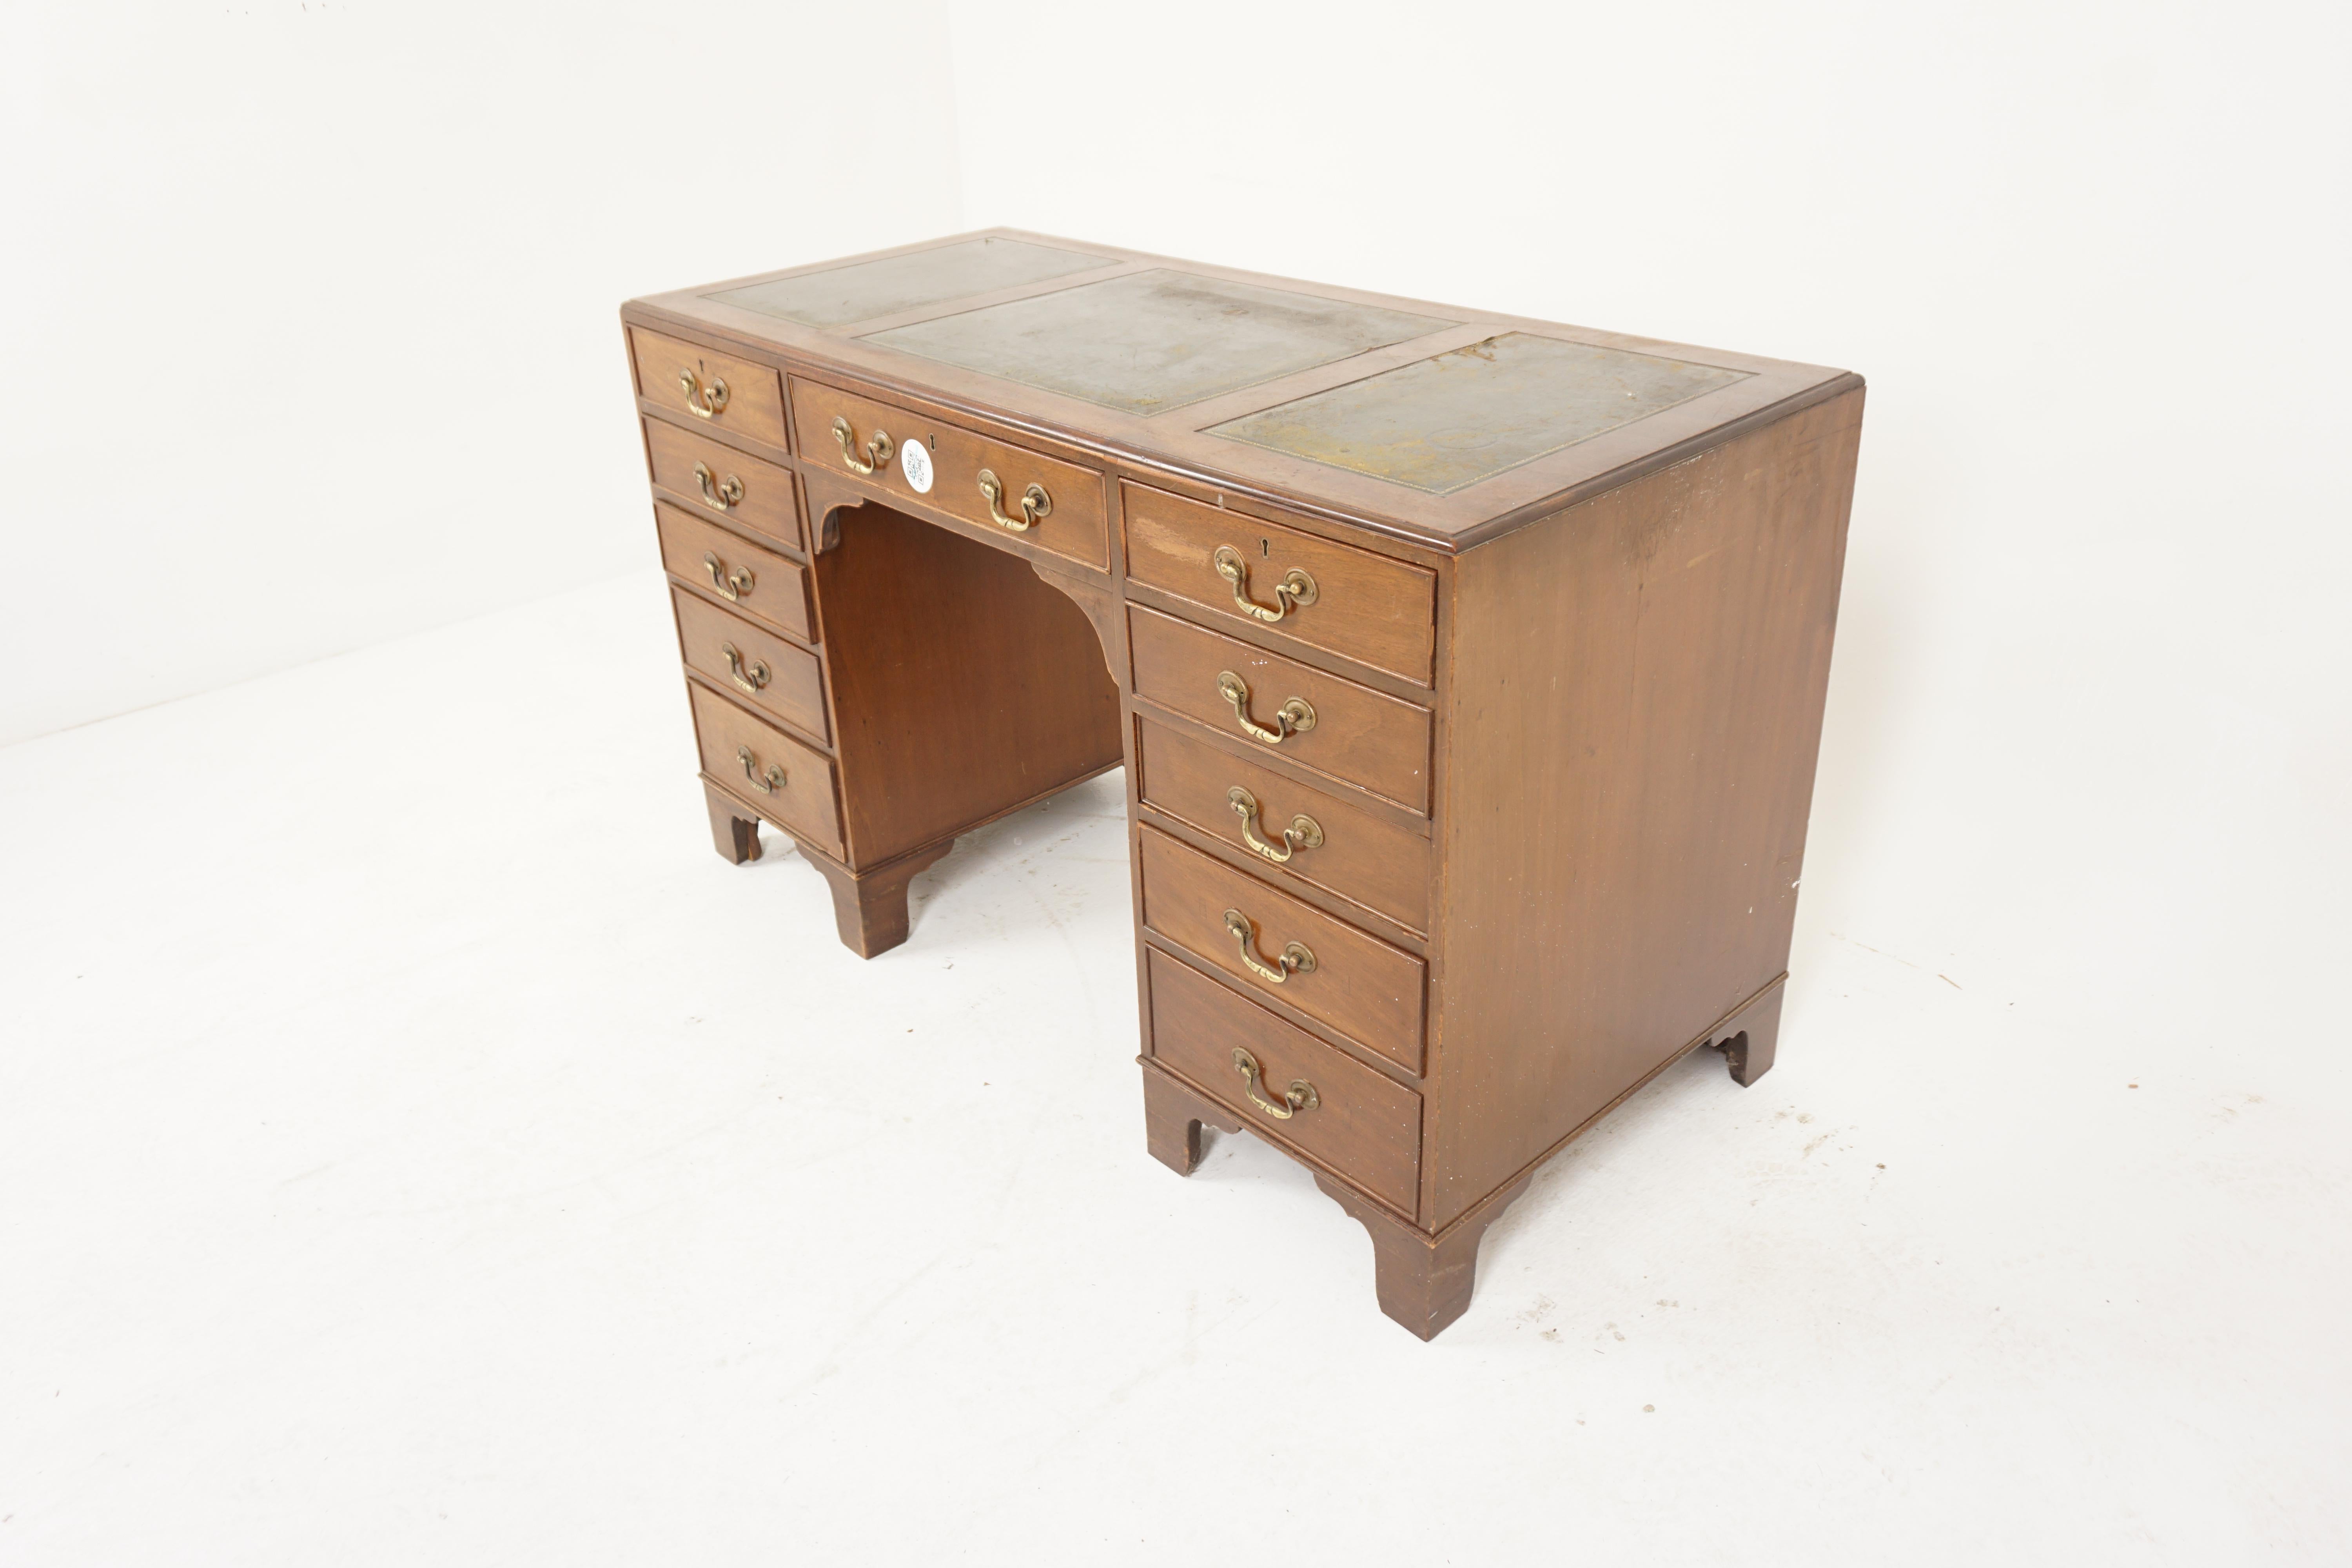 Vintage Walnut Double Pedestal desk, writing table, leather top, Scotland 1930, H736
Scotland 1930
Solid walnut
Original finish
3 leather section rectangular top
Central drawer underneath
Flanked by a pair of pedestals with original brass